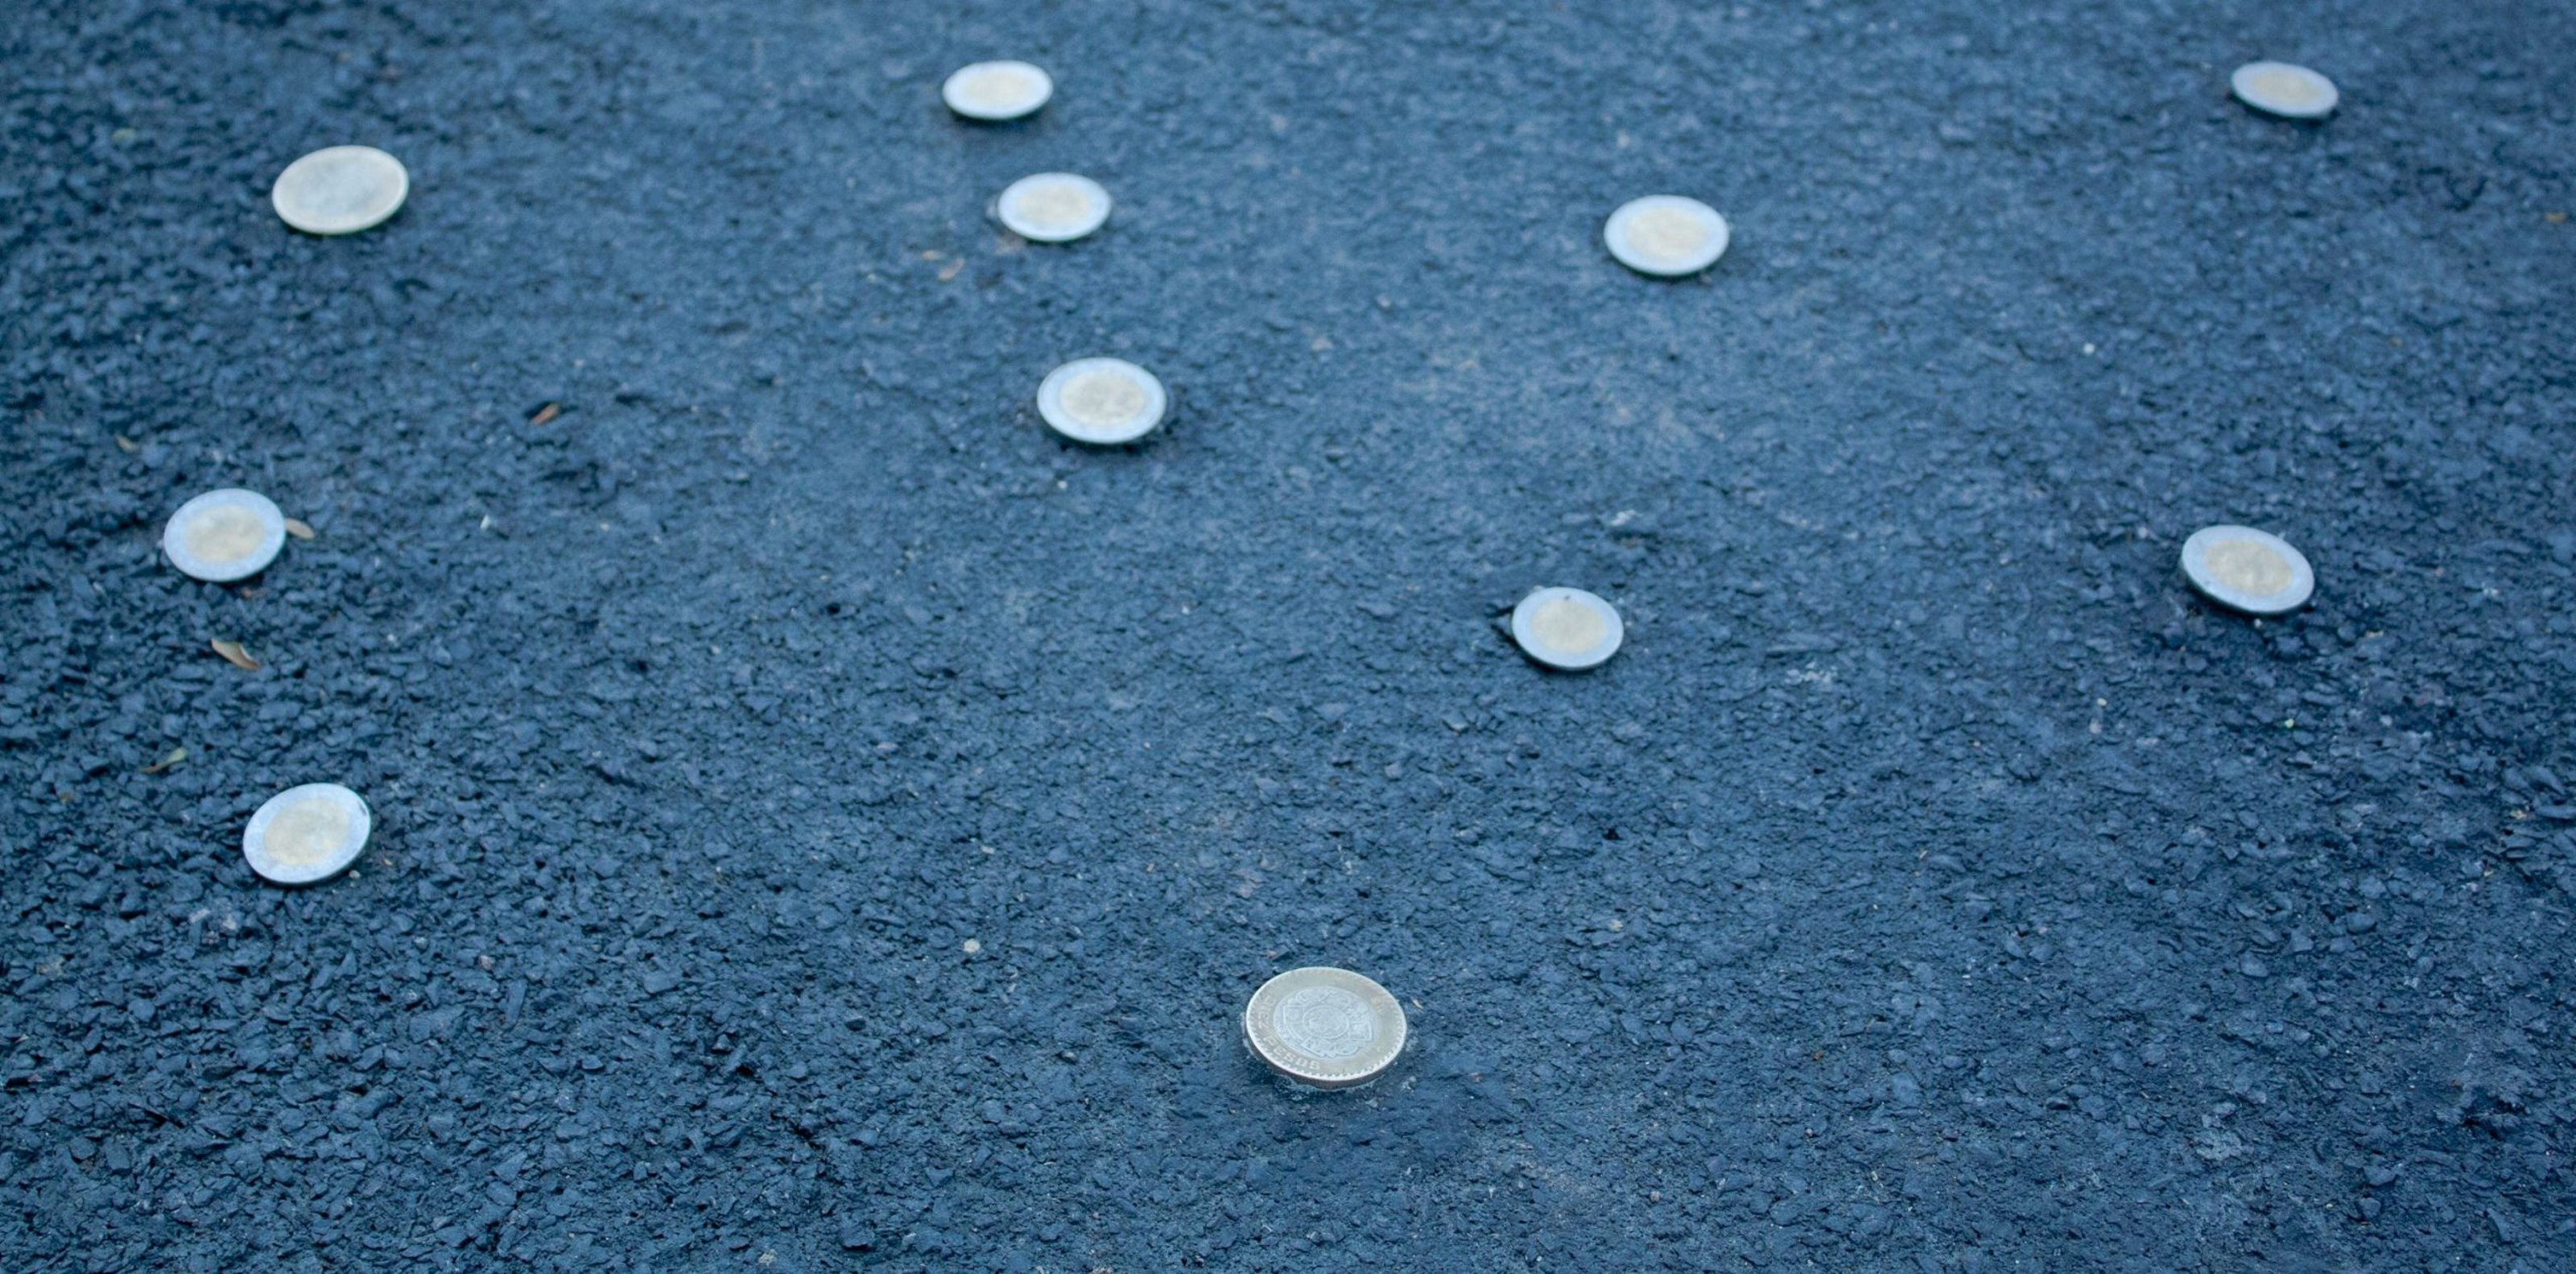 A close shot of coins screwed into the ground.